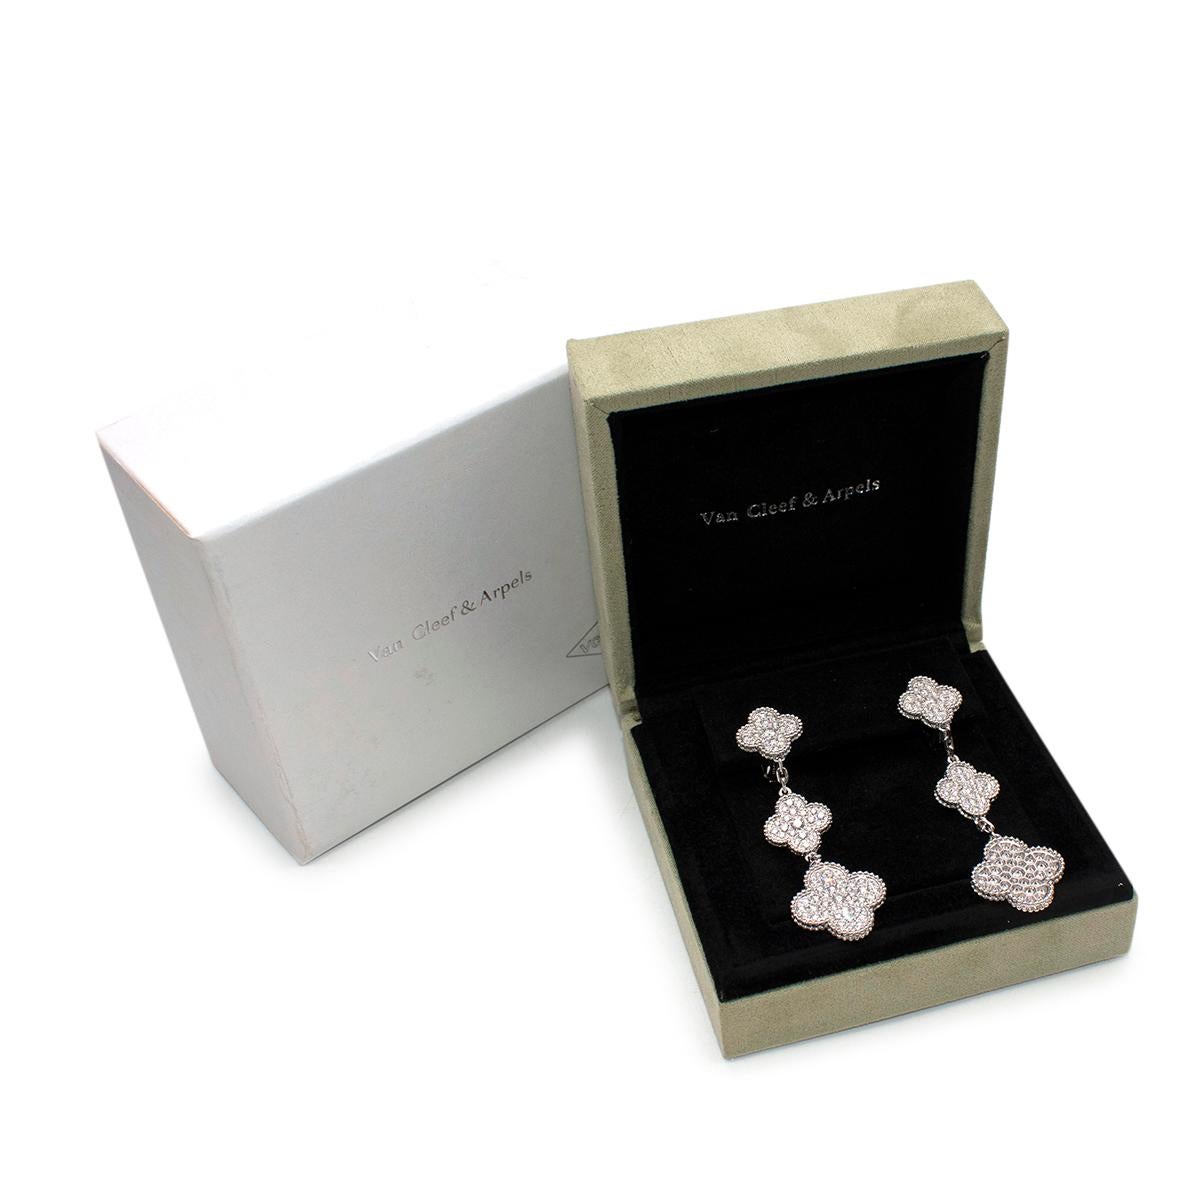 Van Cleef & Arpels Magic Alhambra White Gold & Diamond Earrings

- Inspired by the clover leaf
- Their asymmetric designs feature different associations of materials
- Three different-sized Alhambra motifs
- Clip system with detachable post white